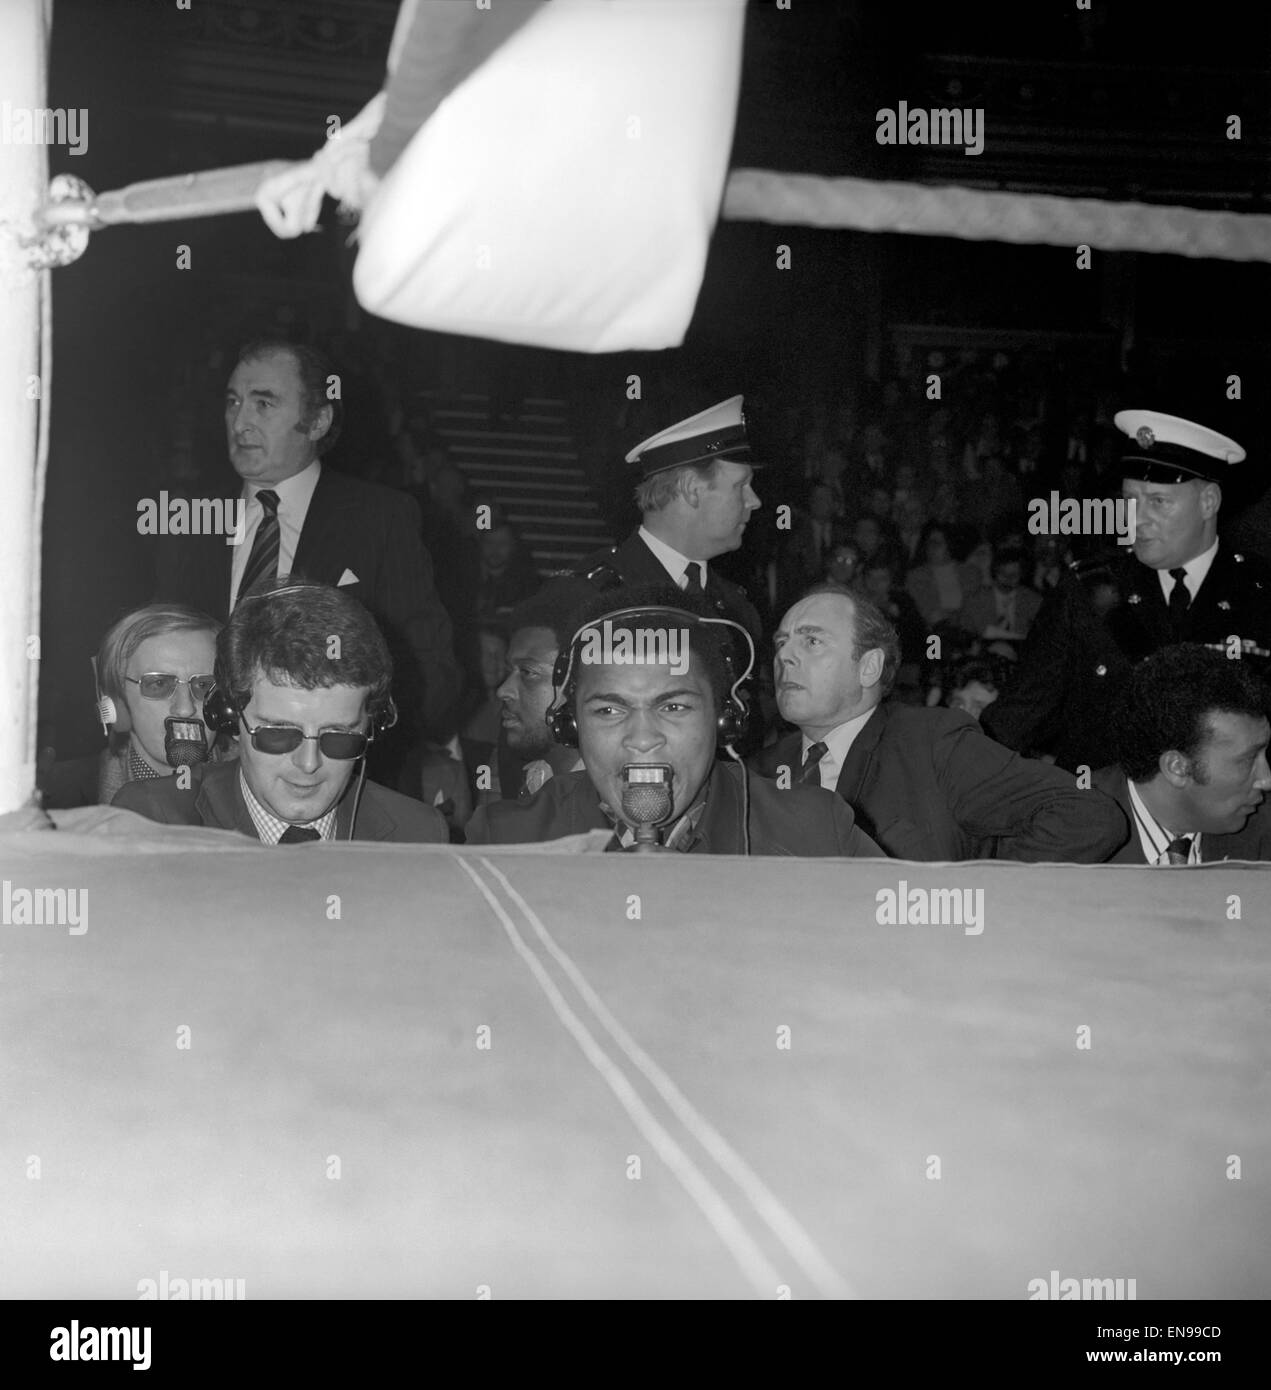 Boxing at Albert Hall. Muhammad Ali seen here with BBC sports commentator John Motson and ATV commentator Alan Parry in the background. The trio are commentating on the Santiago Alberto Lovell v Joe Bugner bout. 3rd December 1974 Stock Photo